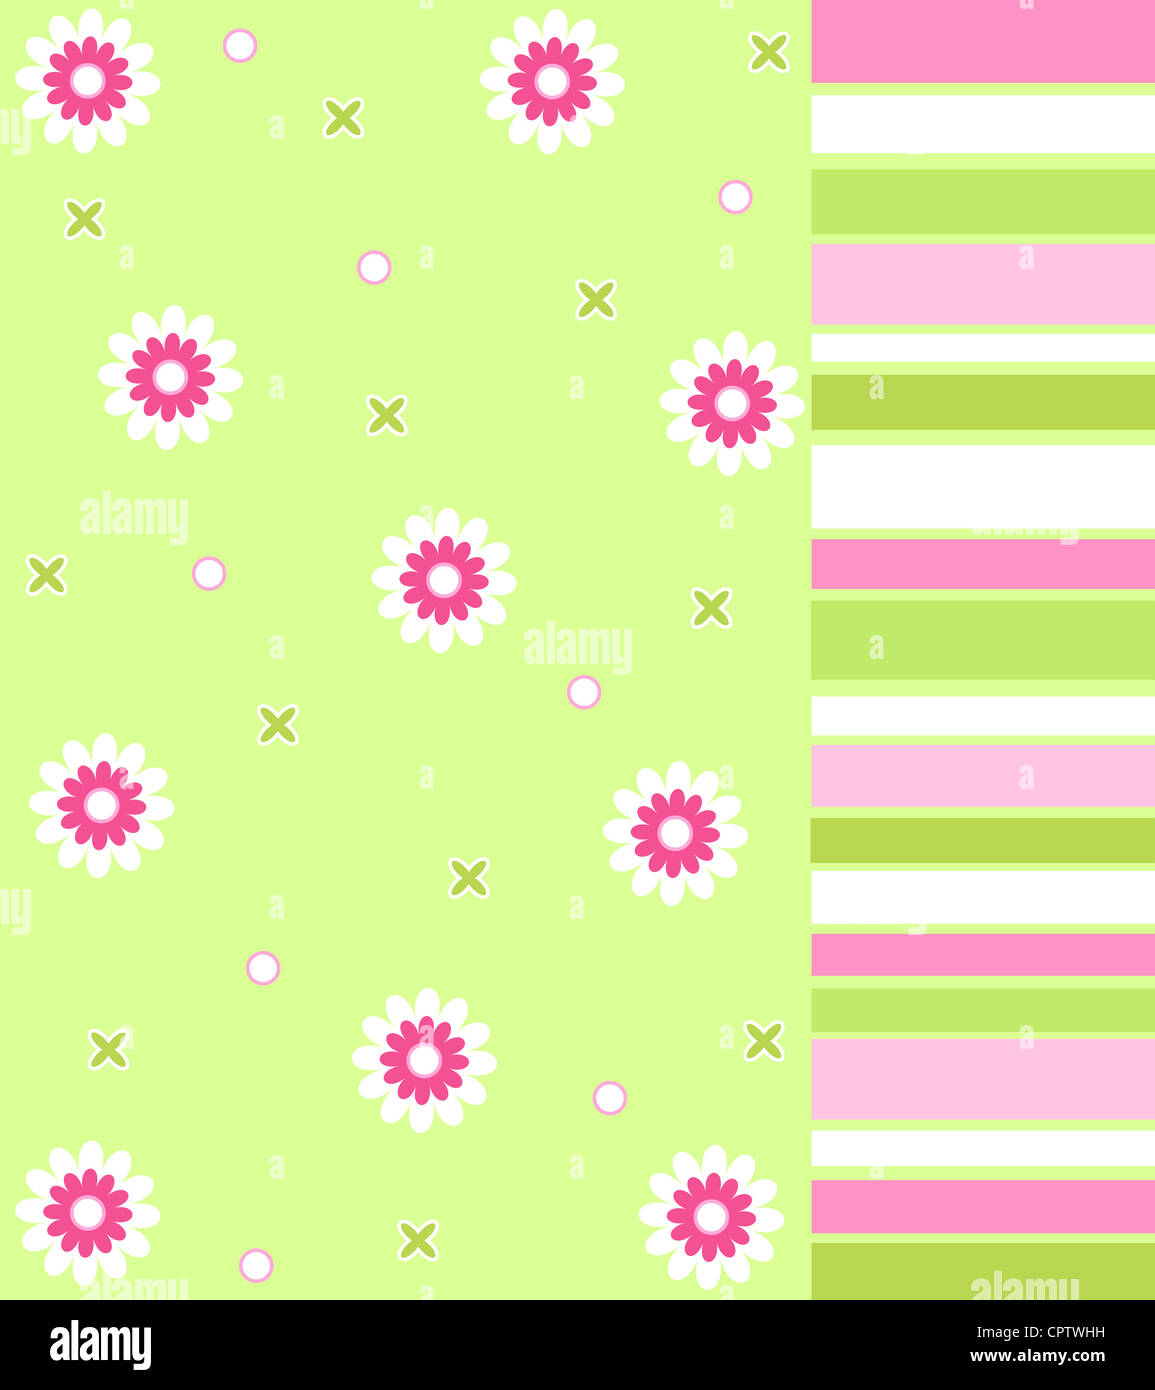 Floral and stripes pattern in white, green and pink Stock Photo